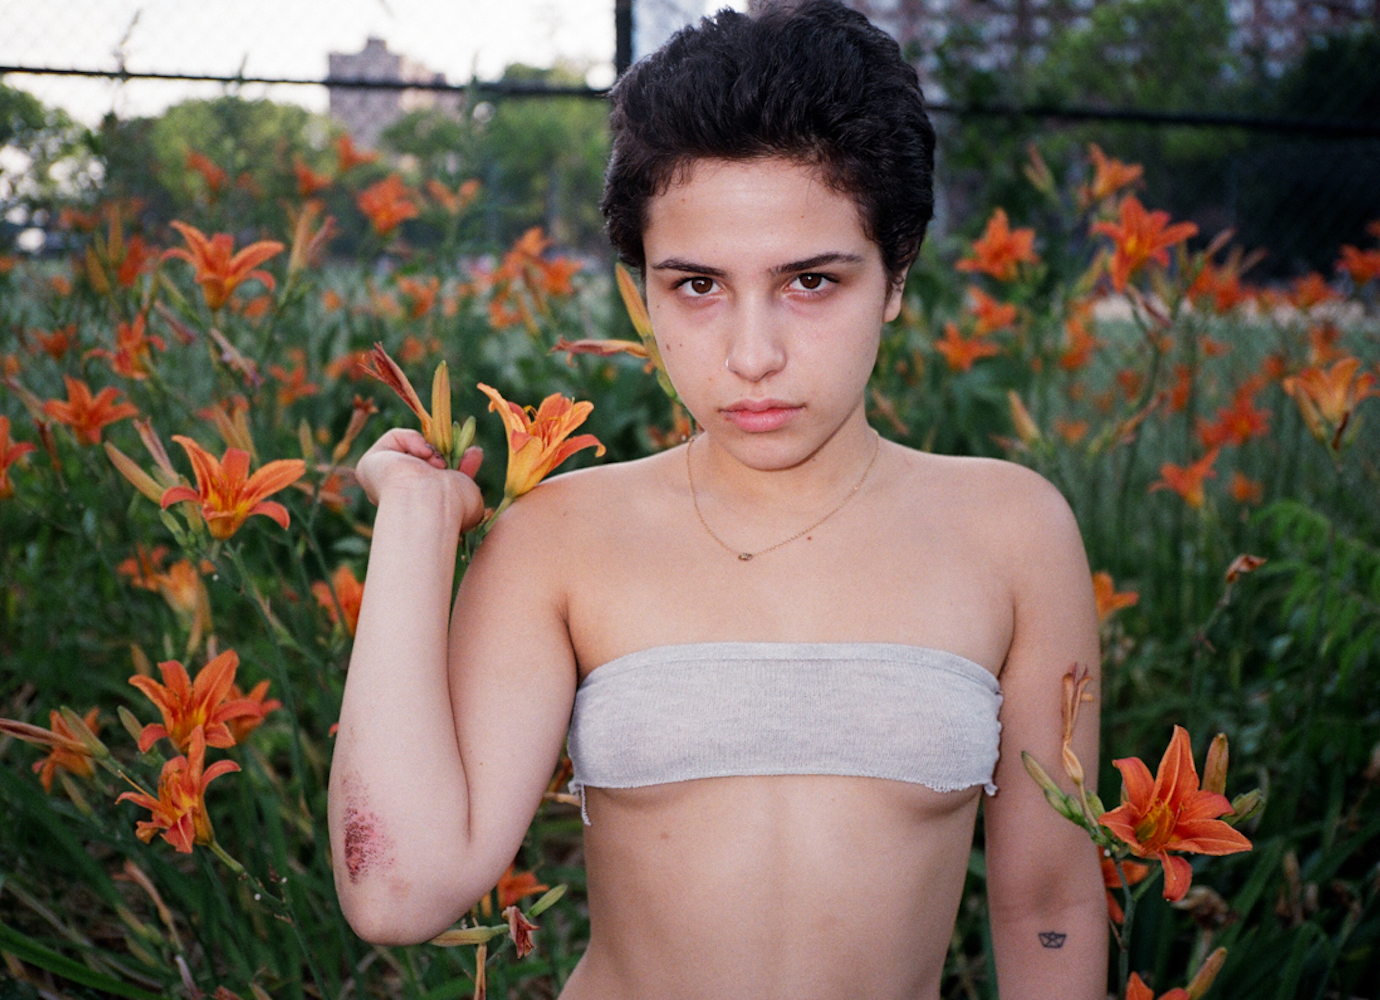 See tender and hedonistic portraits of youth from the Czech Republic and the US